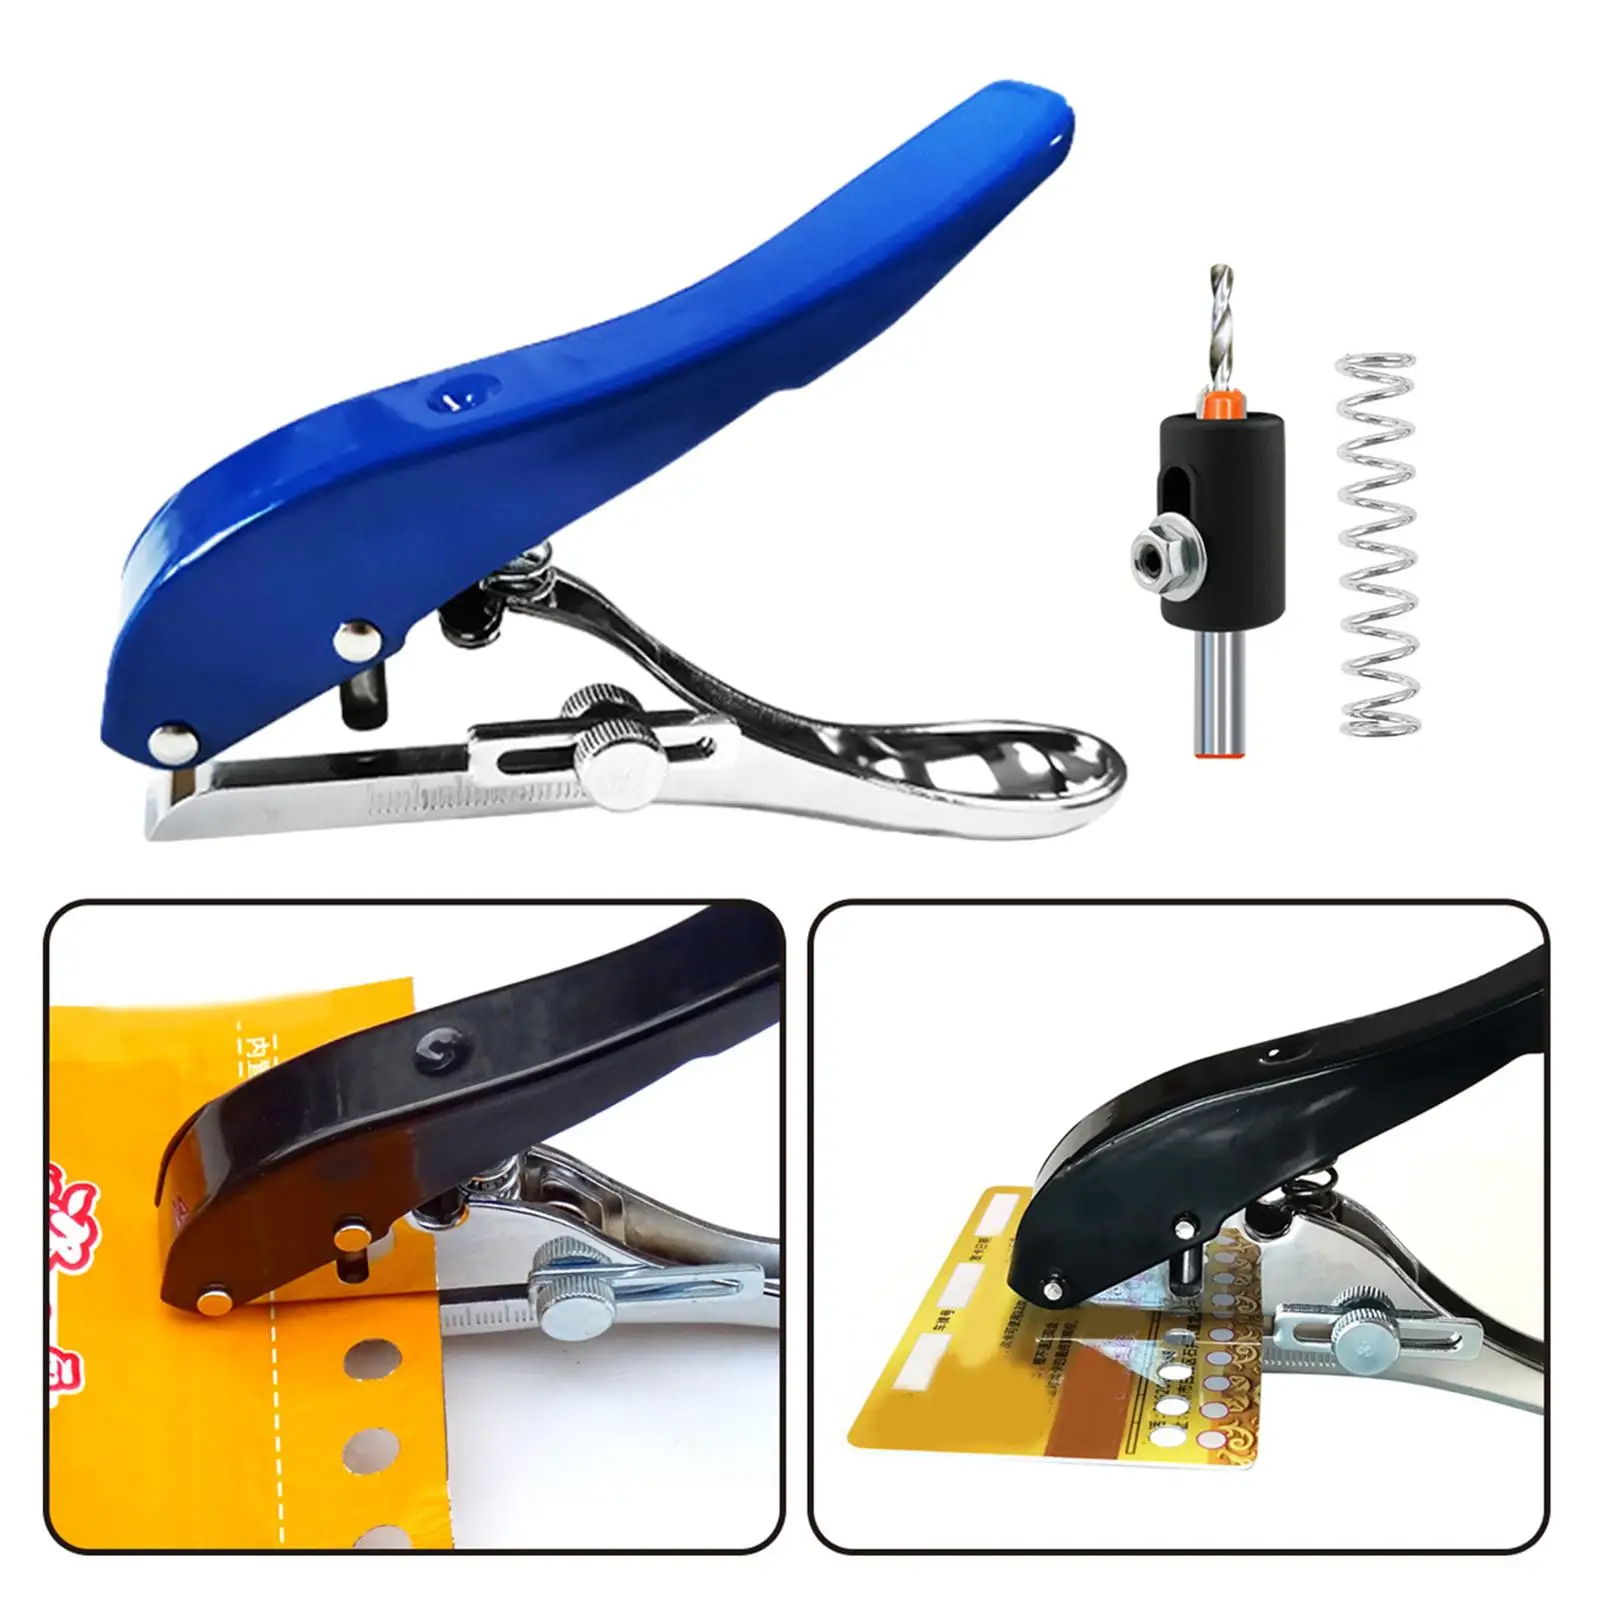 Manual Edge Band Puncher Plier Paper Punch Punching Tool Woodworking for Cards Photo